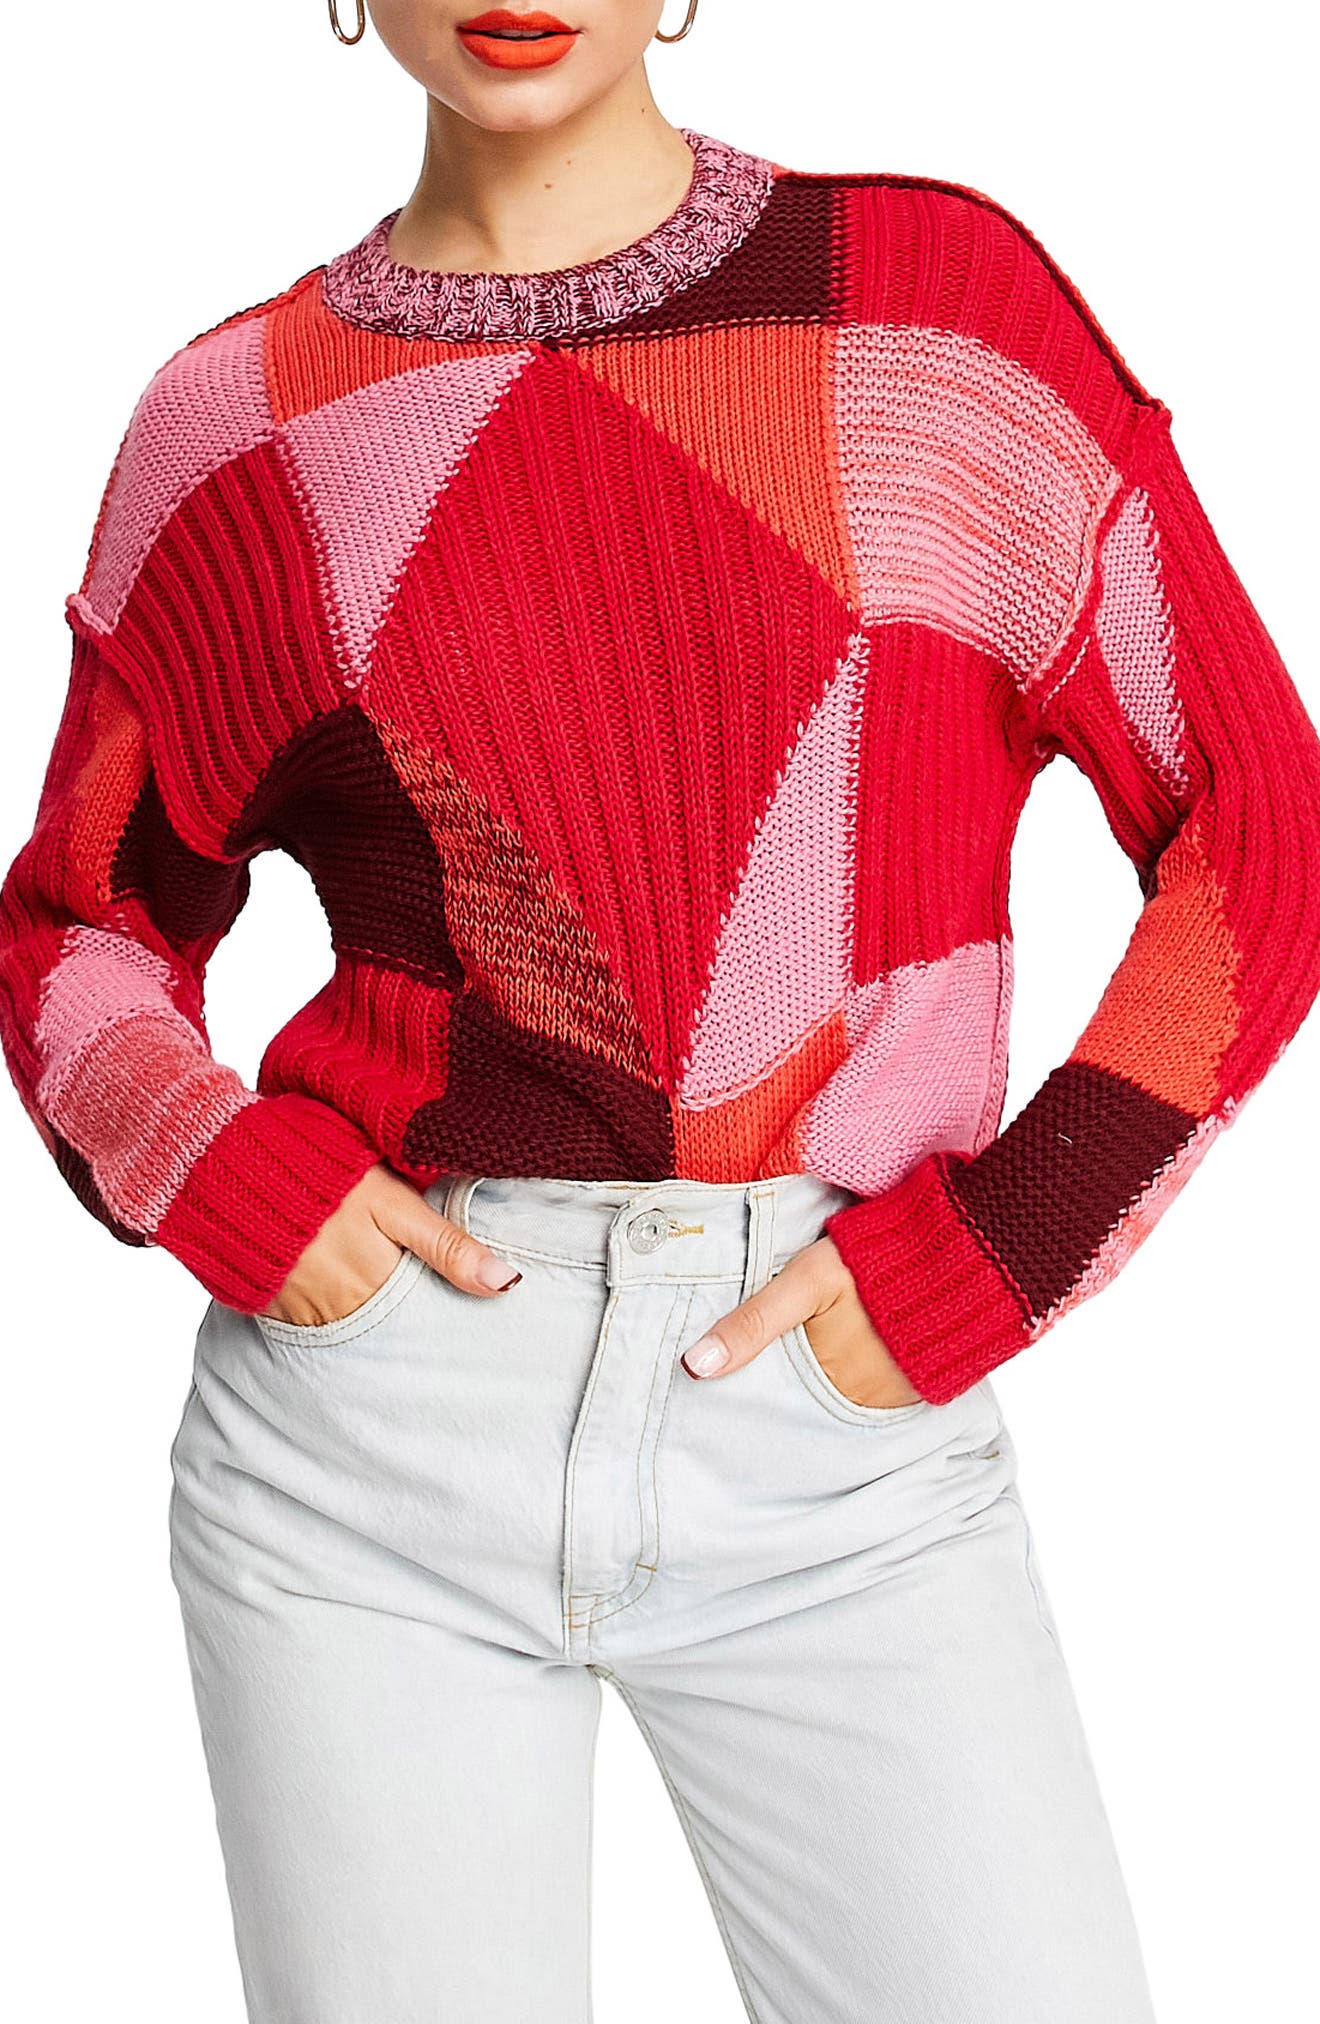 Crimson and Gold Knit Bottle Sweater